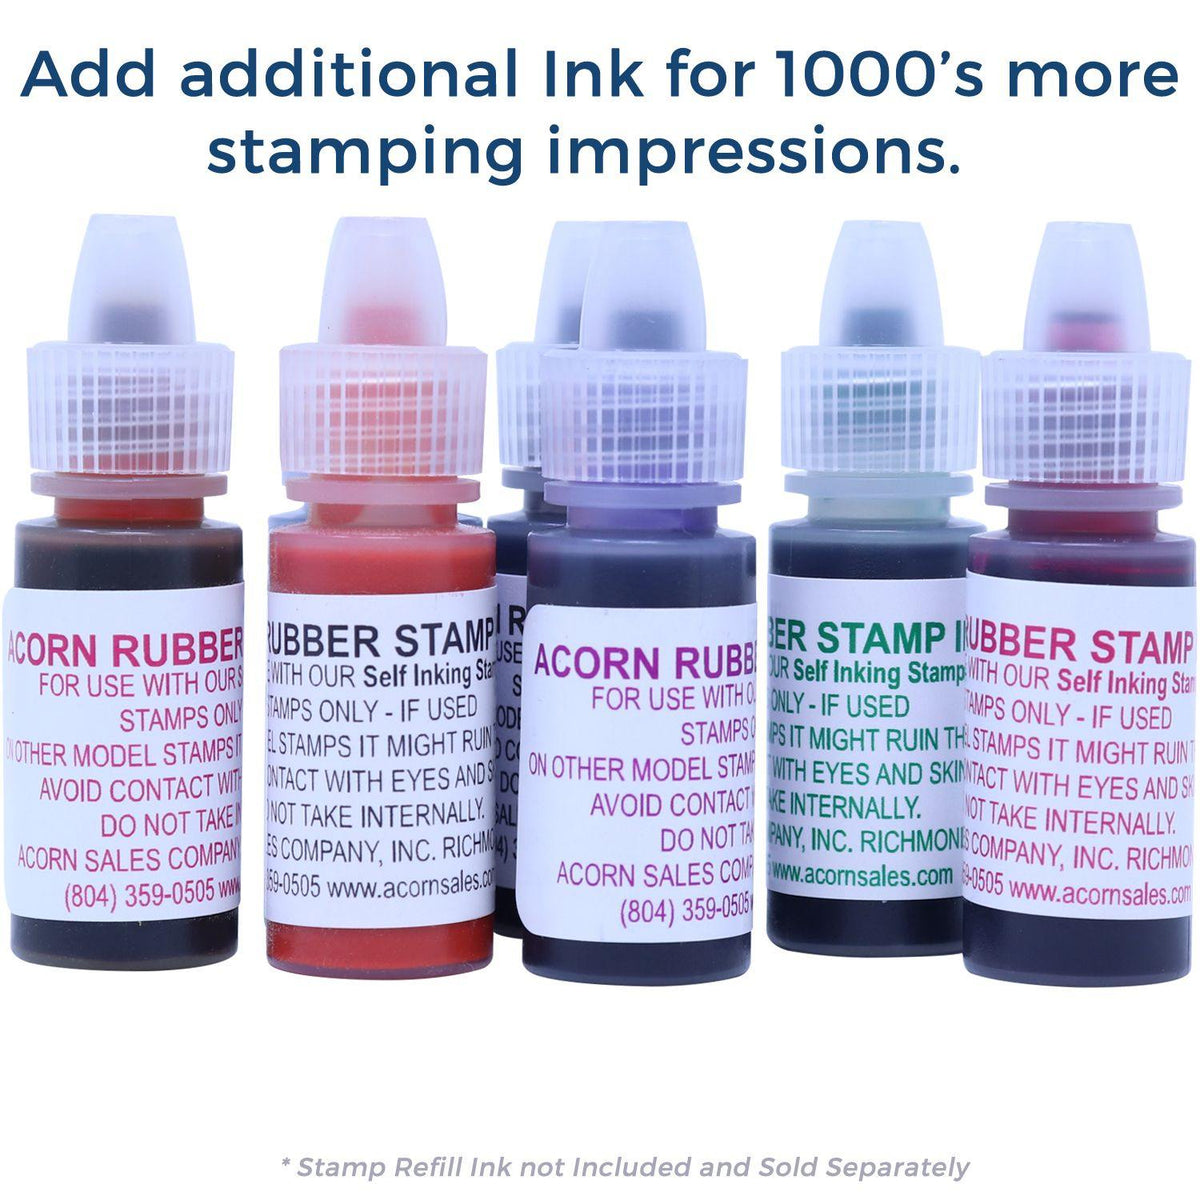 Refill Inks for Large Pre-Inked X-Rays Stamp Available